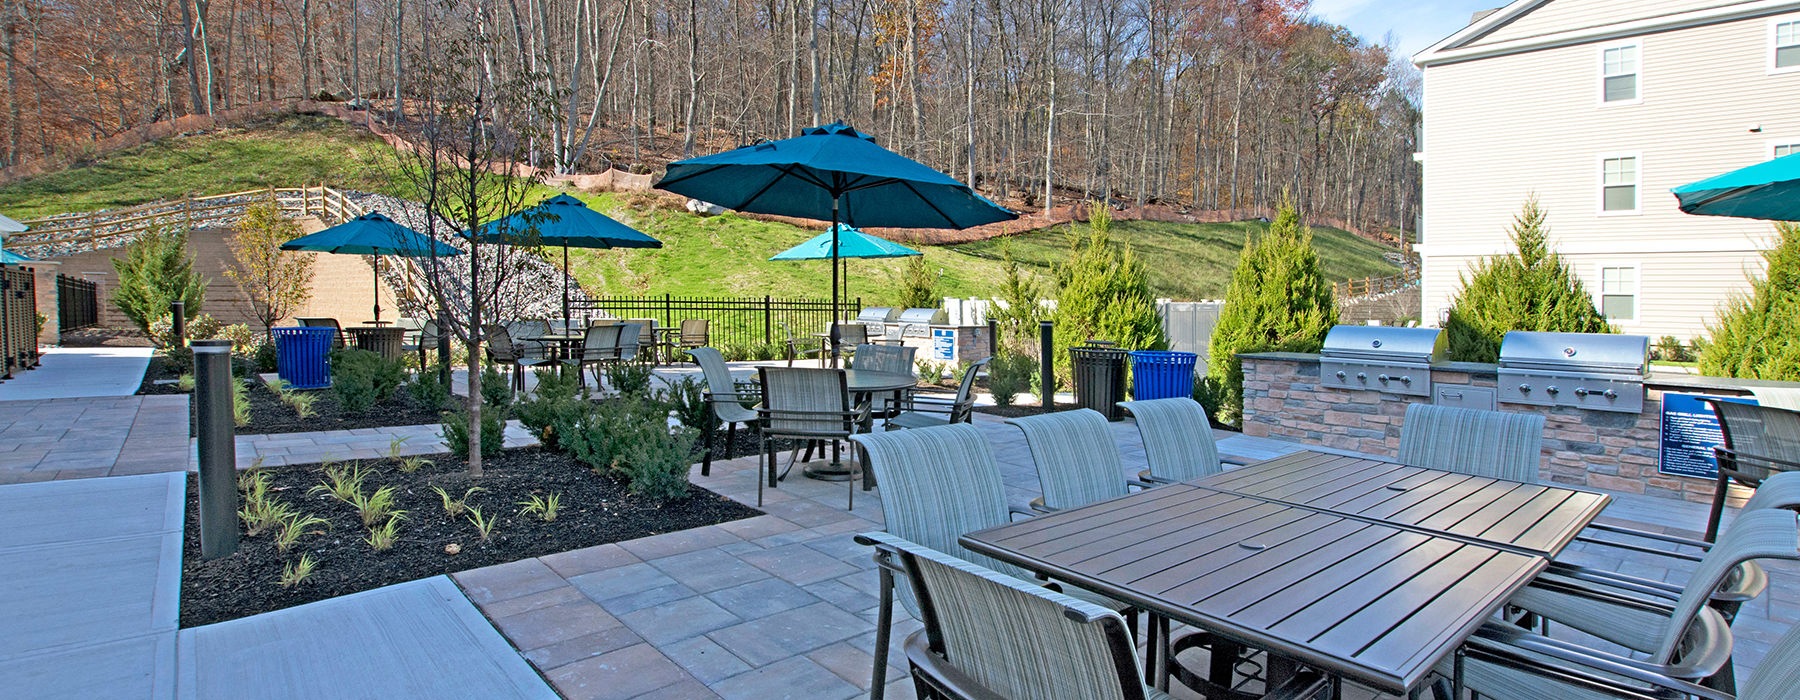 Woodgrove at Sterlington outdoor patio with tables and umbrella coverings